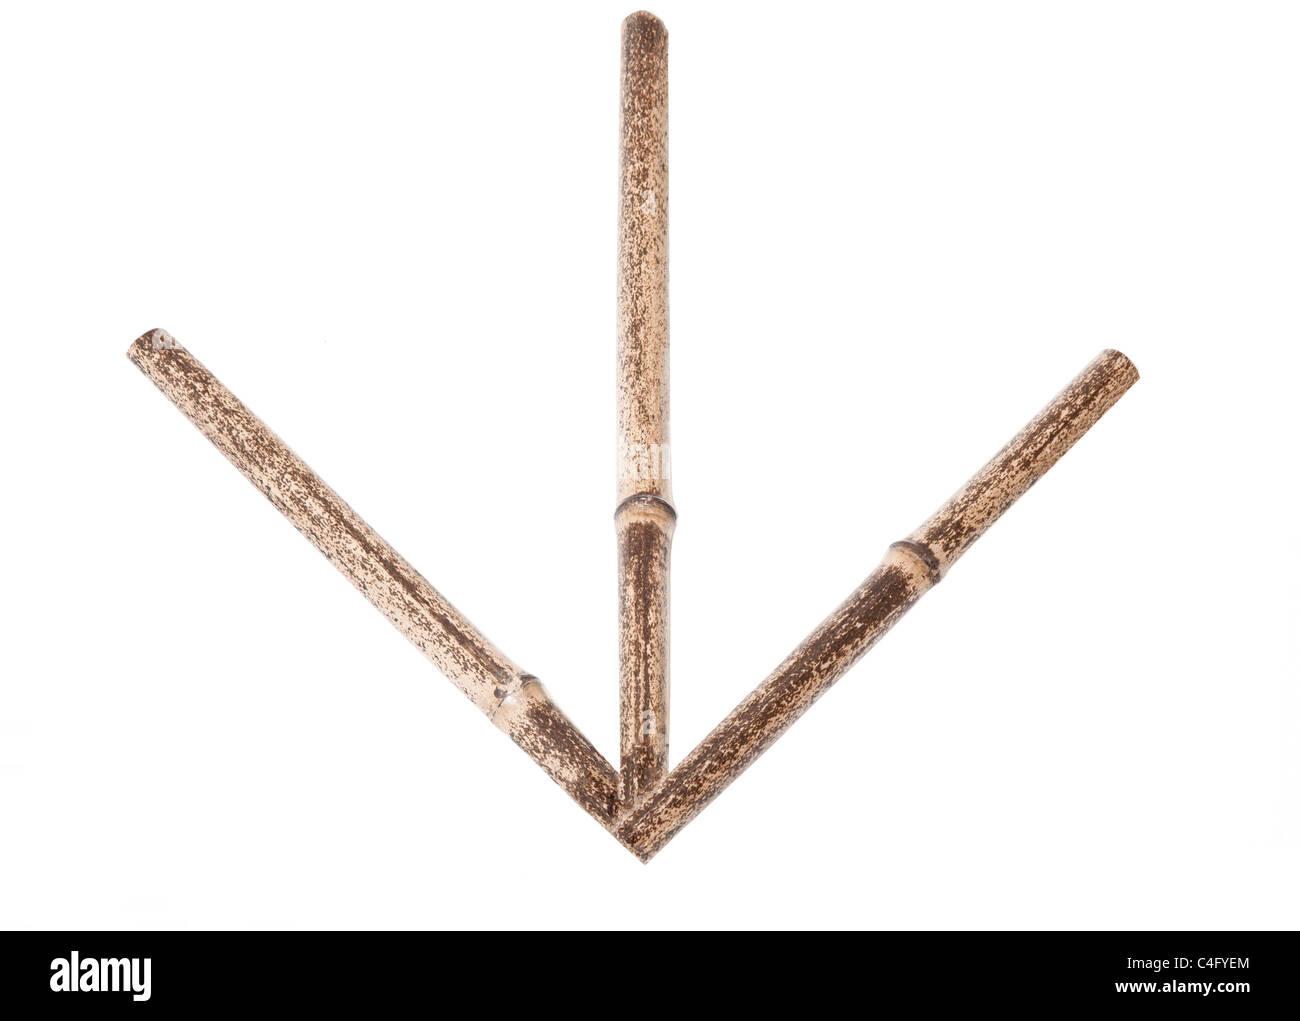 Arrow made of bamboo pointing downwards Stock Photo